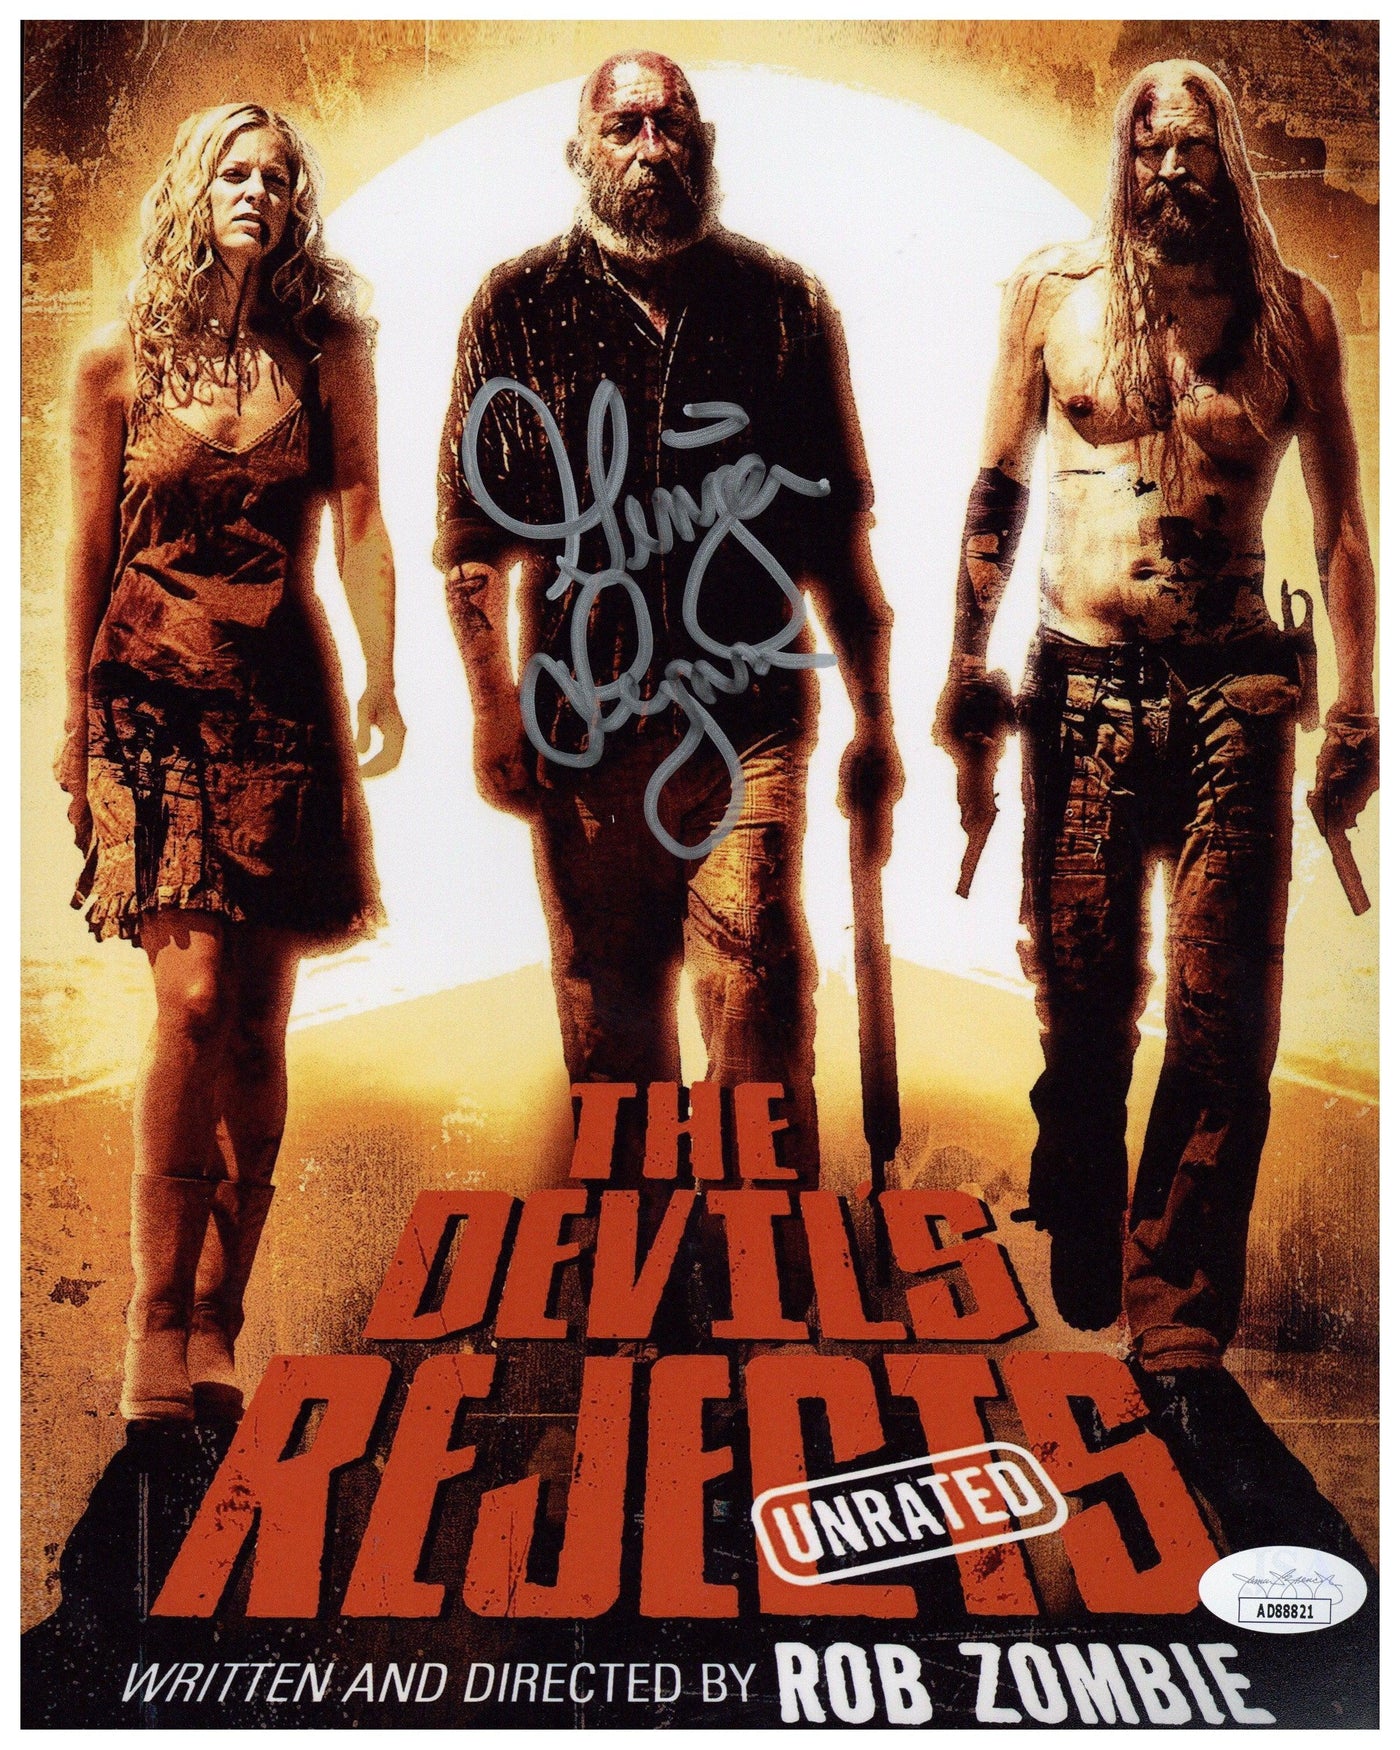 Ginger Lynn Signed 8x10 Photo The Devils Rejects Horror Autographed JSA COA